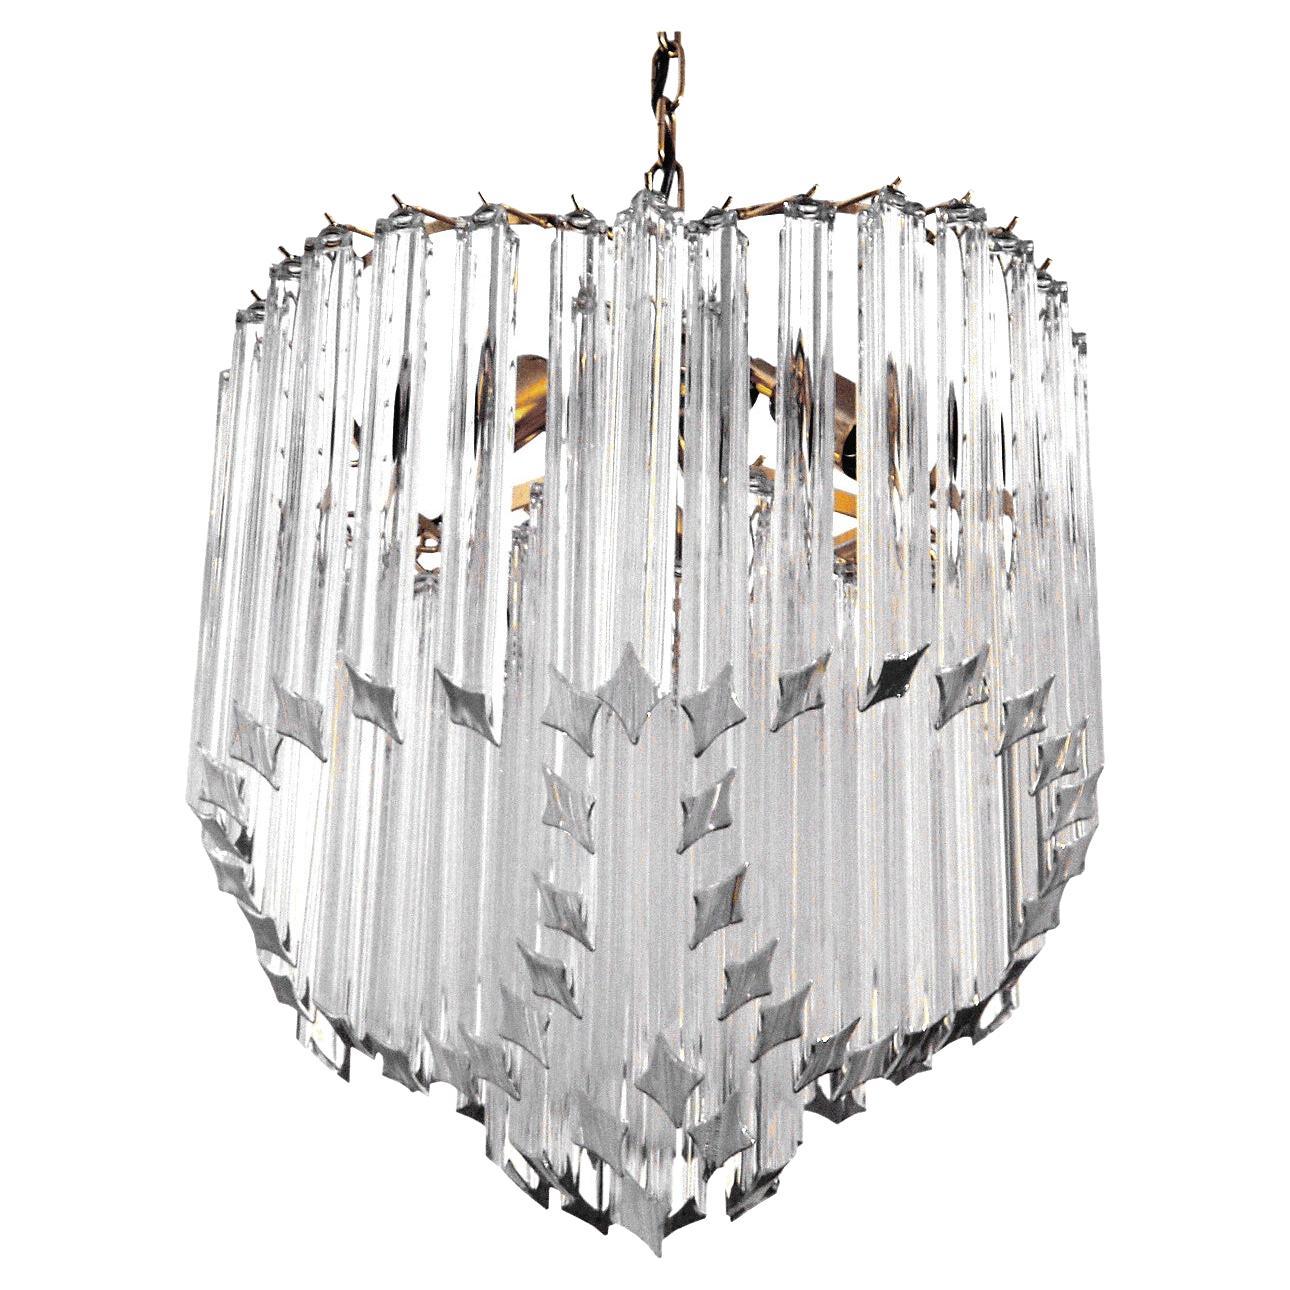 Vintage Ceiling Lamp Crystal Paolo Venini, Italy, years 1980